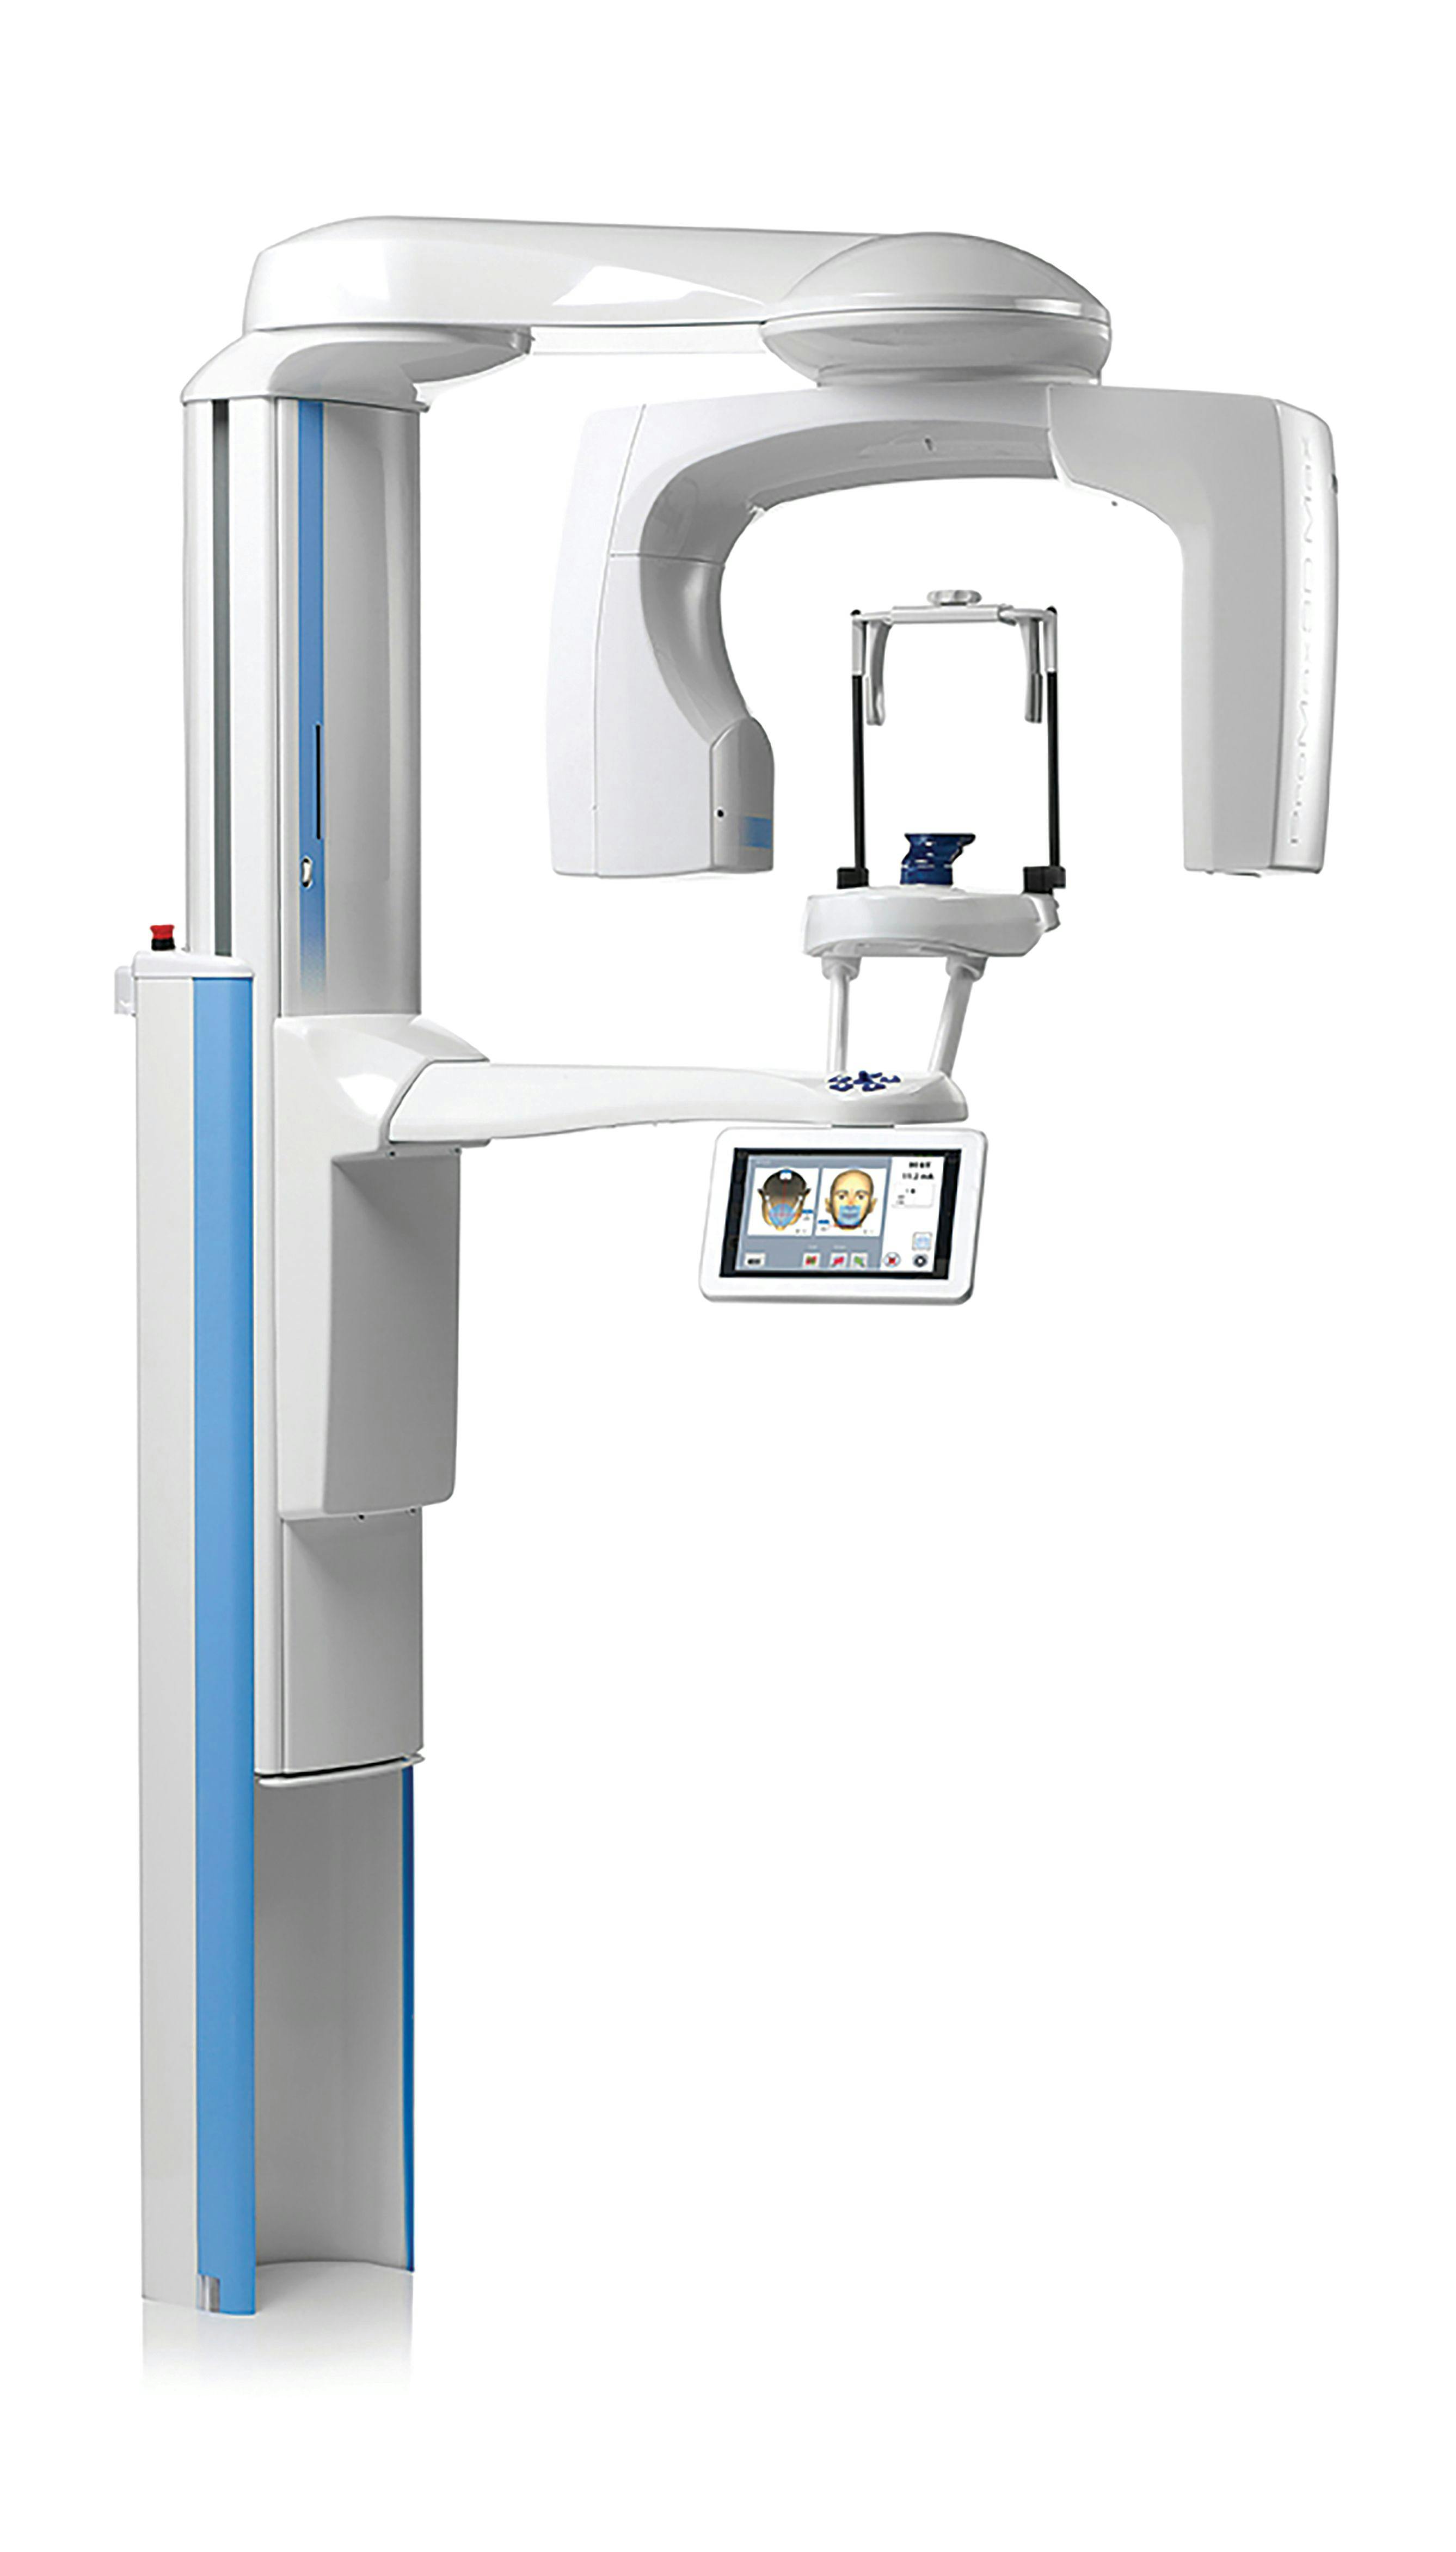 ProMax® 3D Classic imaging system from Planmeca